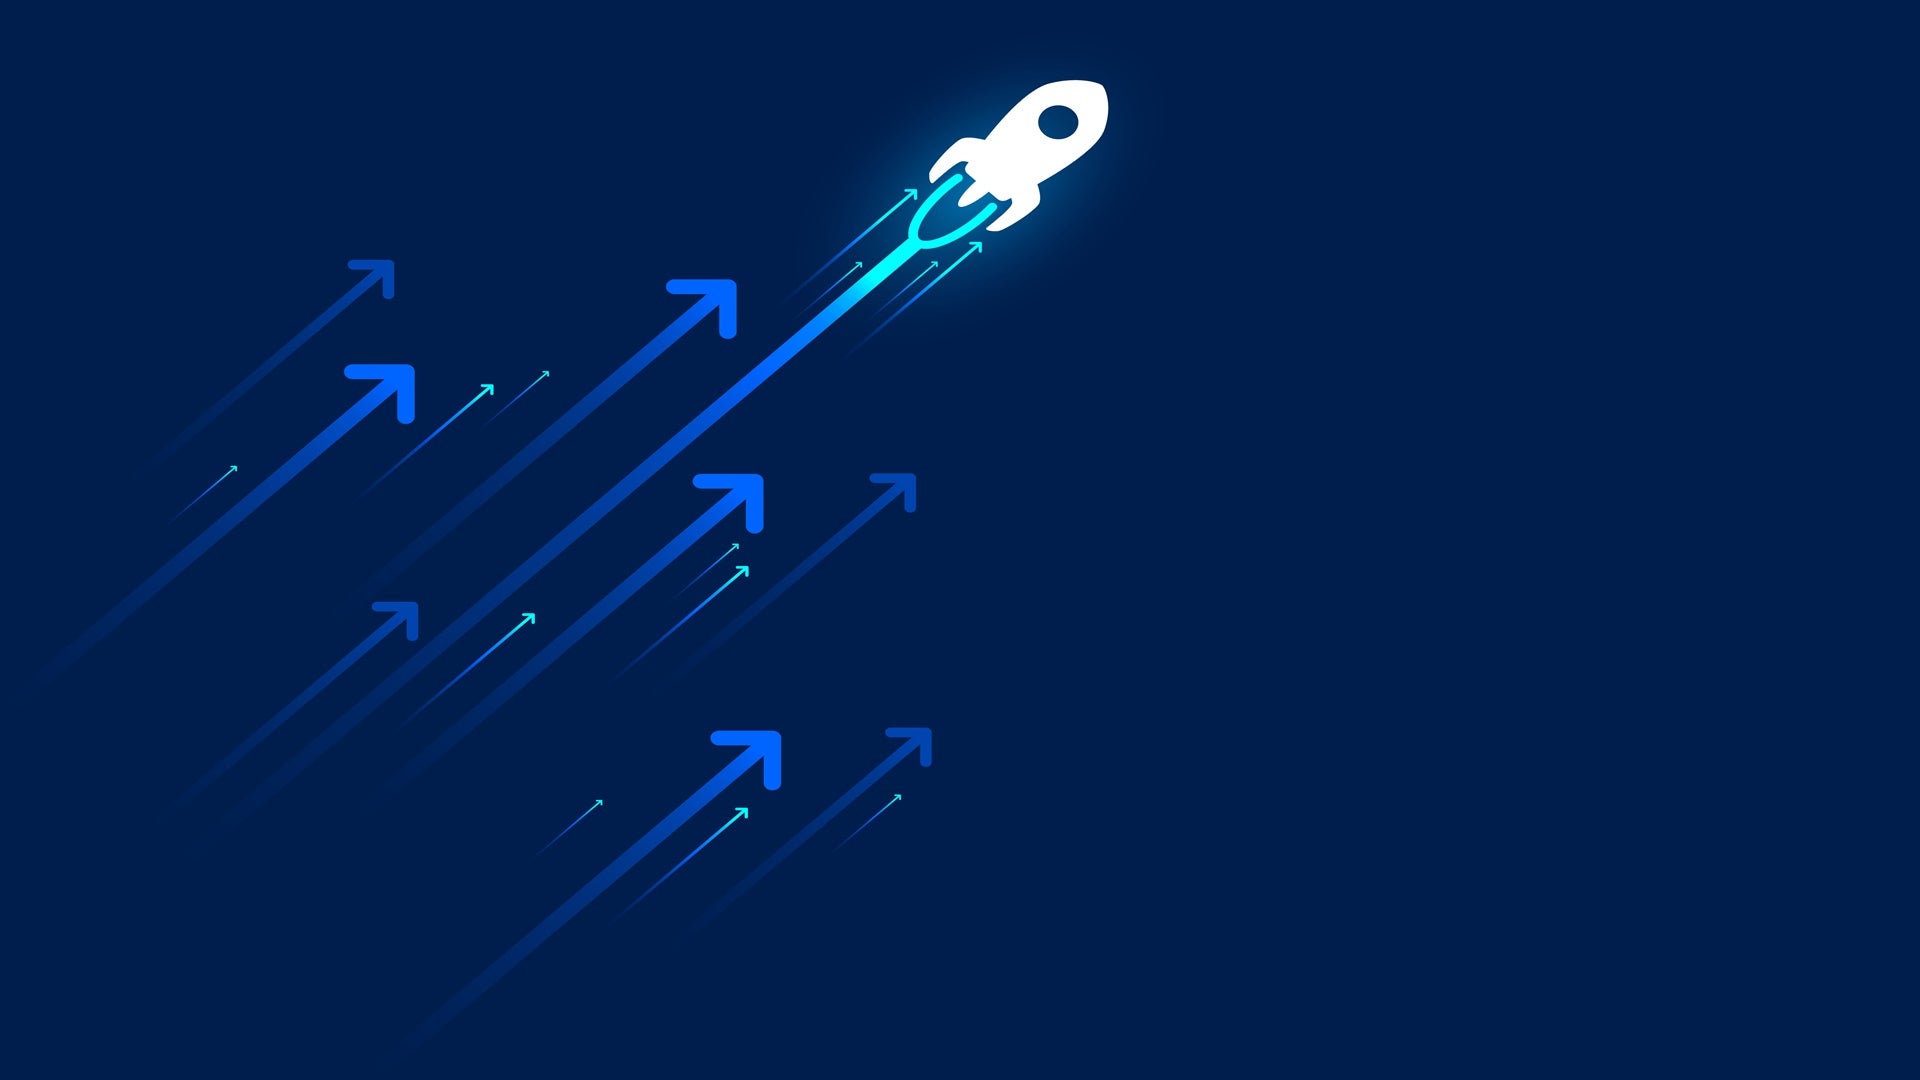 Up rocket and arrows on blue background illustration, copy space